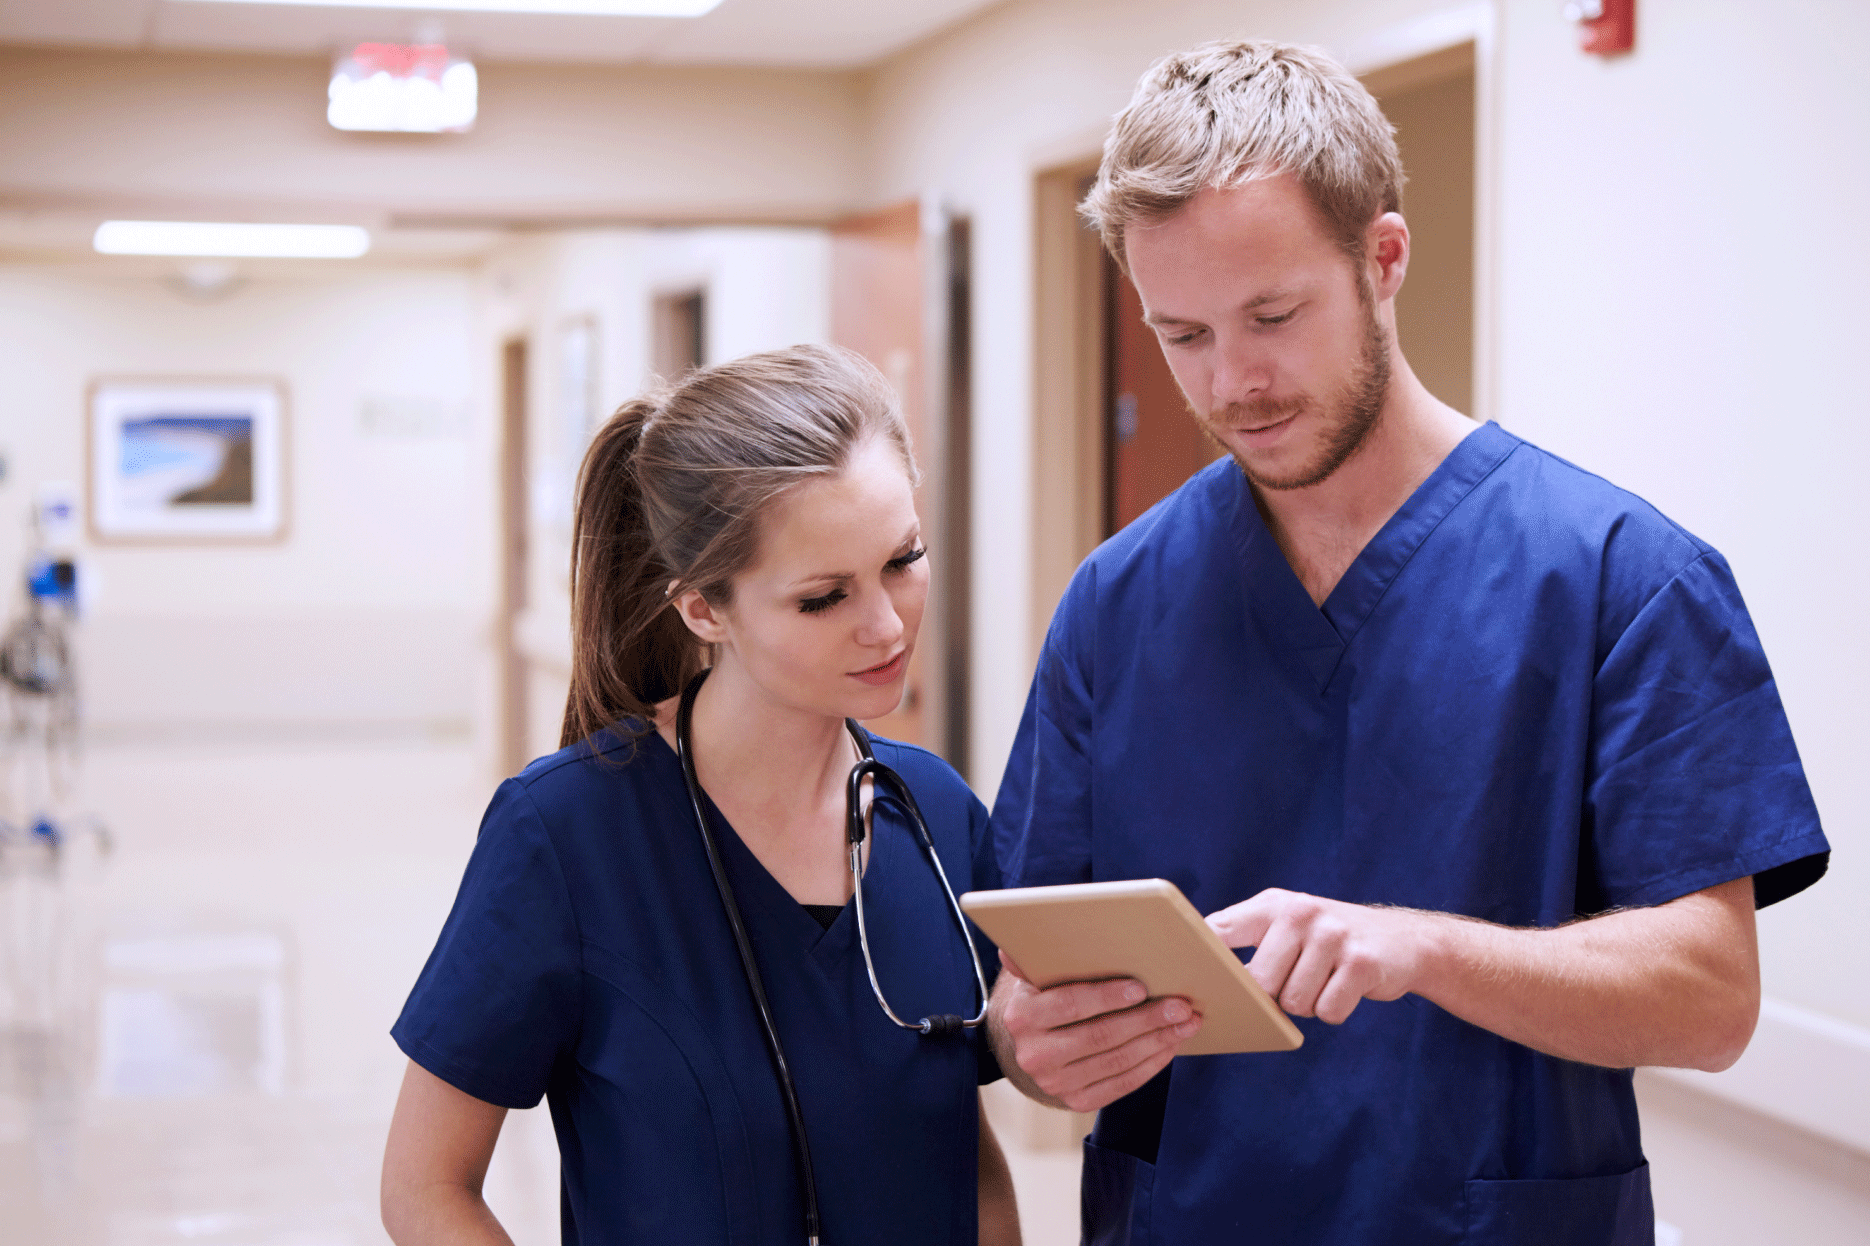 Two clinicians standing in hospital hallway looking at tablet screen.